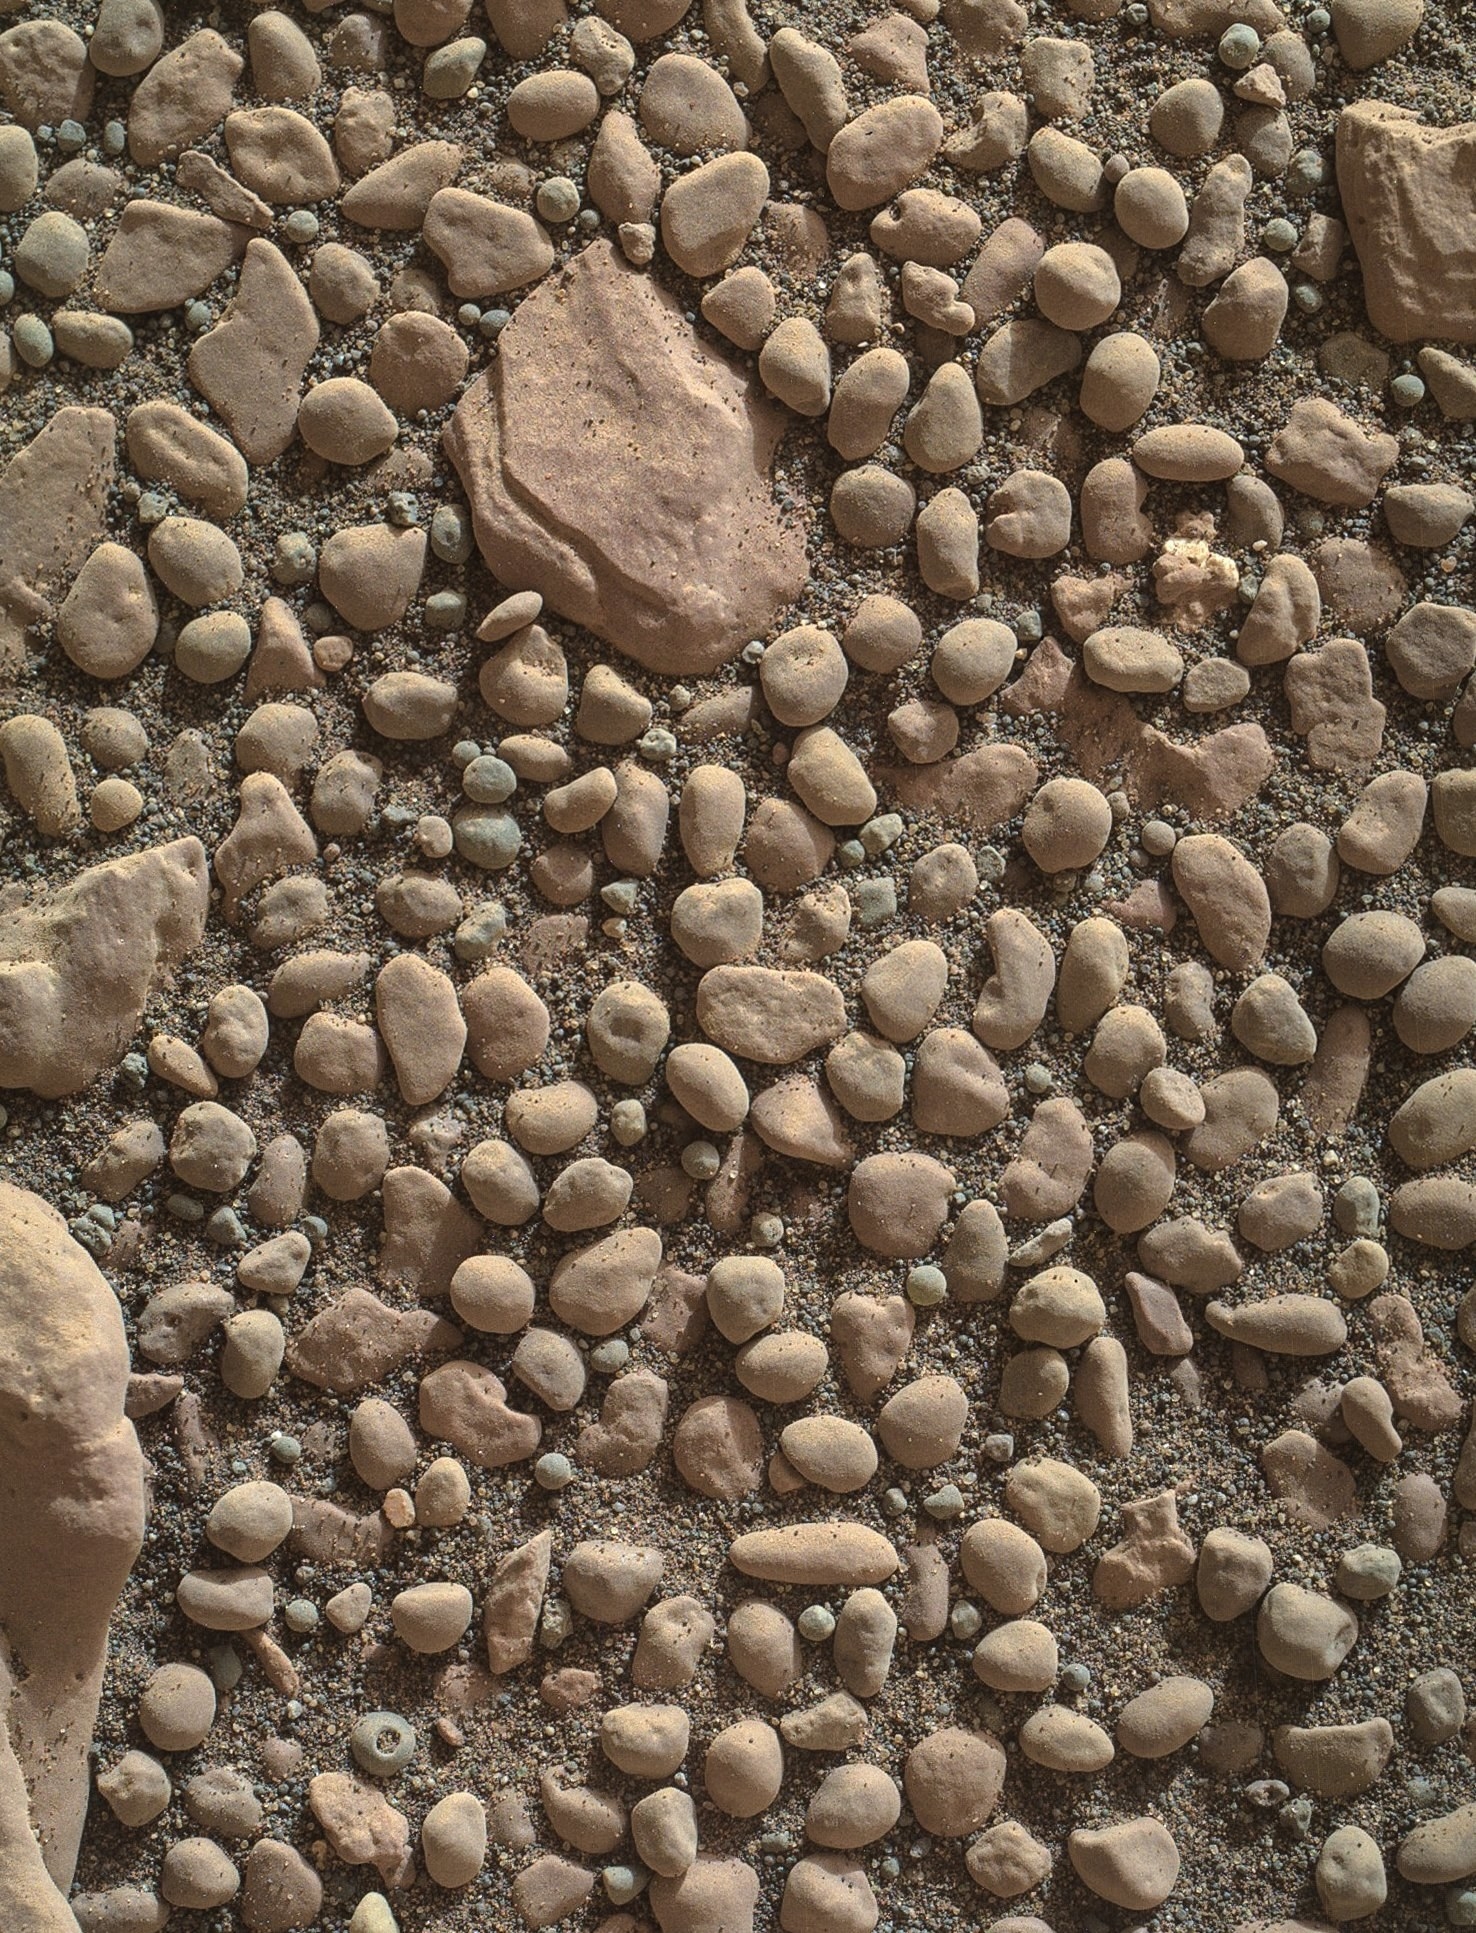 Many large pebbles and stones on a sandy surface